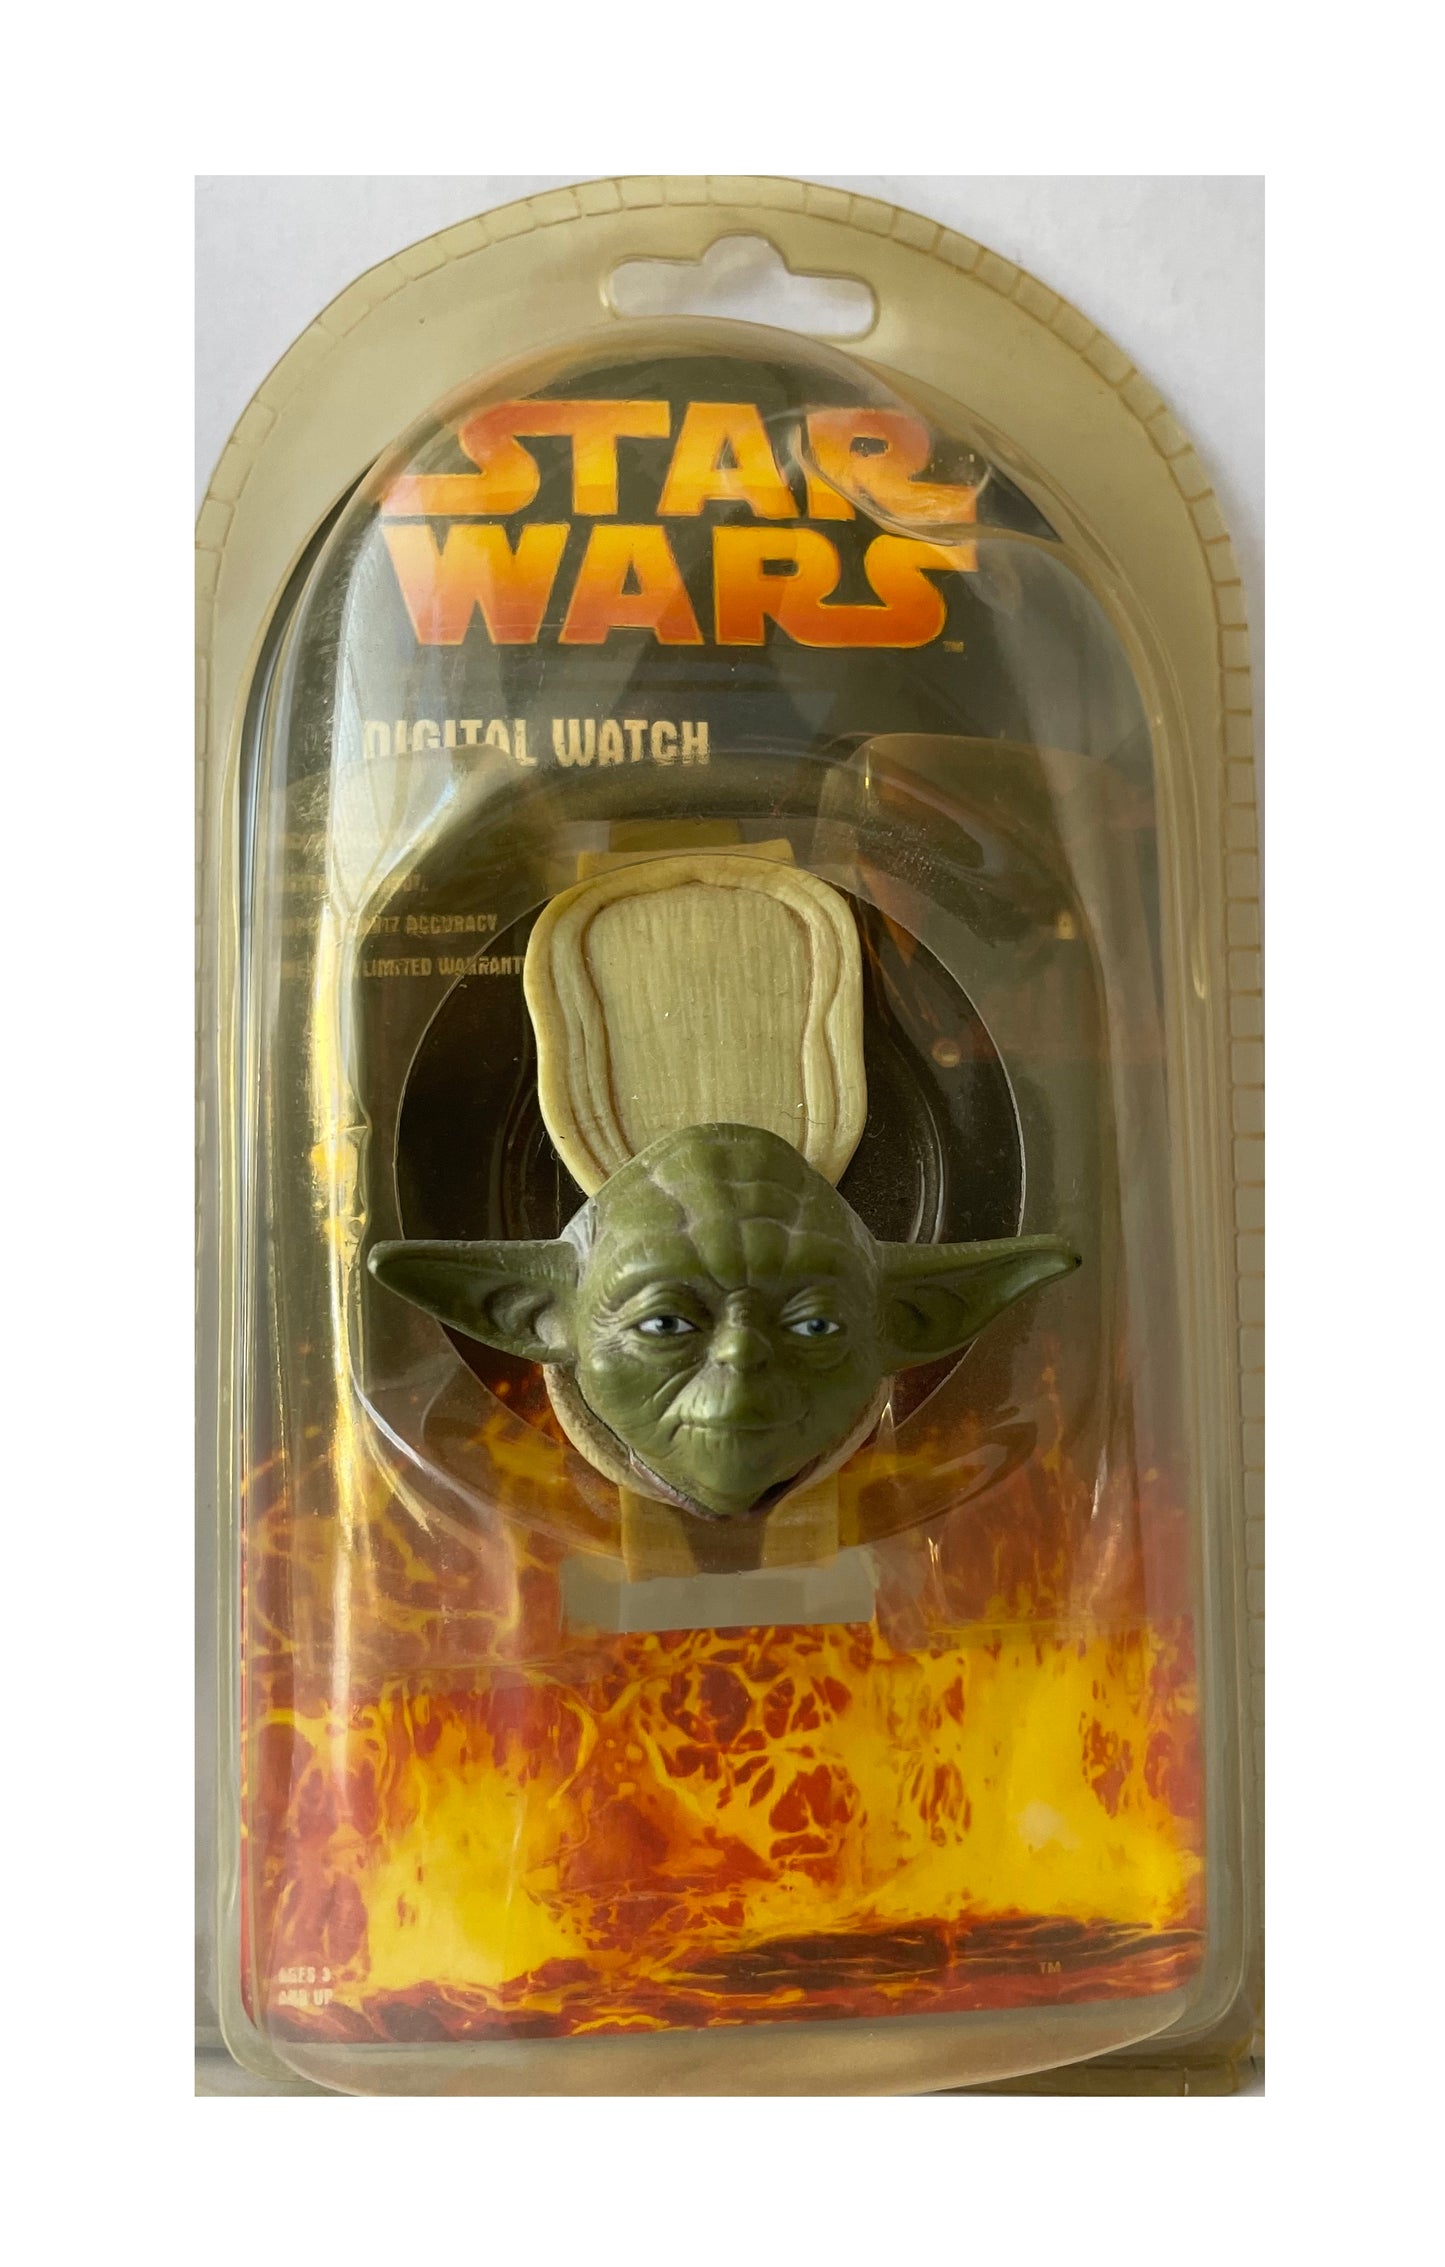 Vintage 2005 Star Wars The Revenge Of The Sith Jedi Master Yoda Head Digital Watch - Factory Sealed Shop Stock Room Find